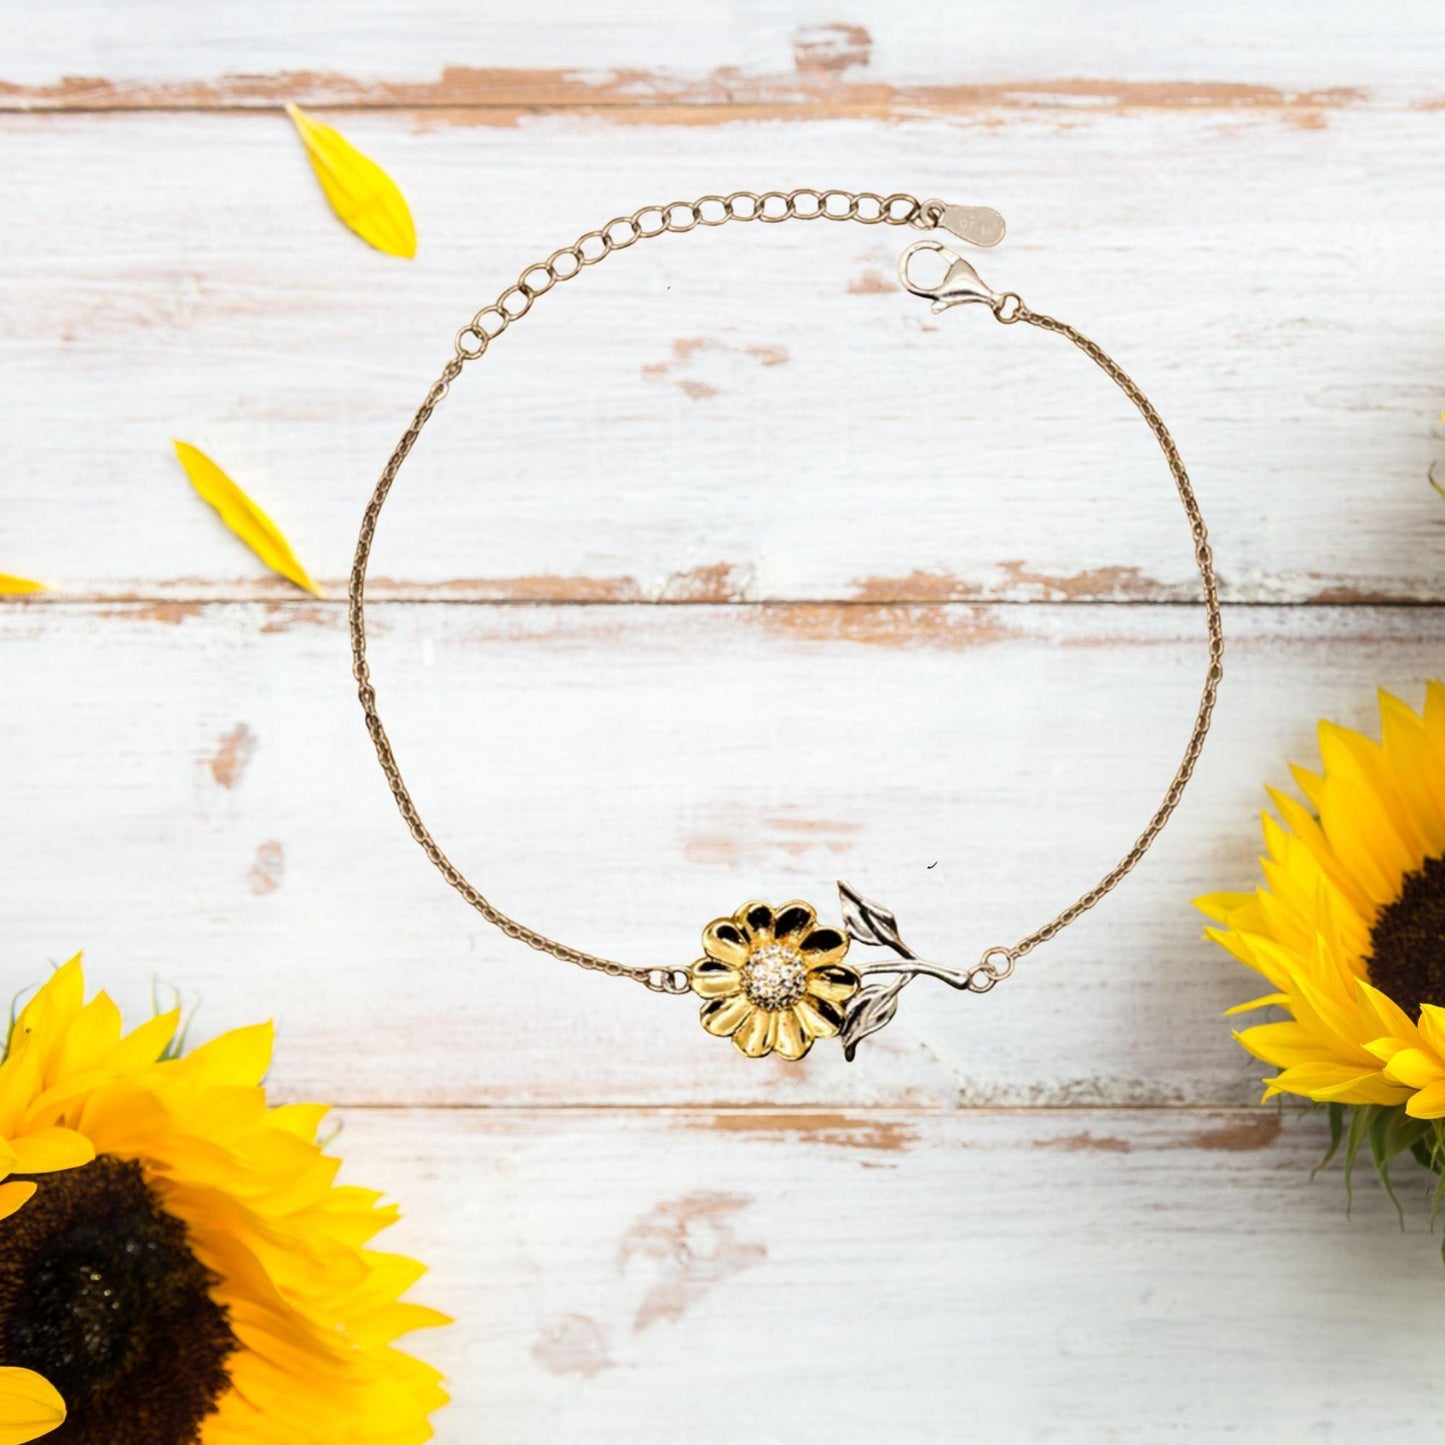 Grandmother Gifts, To My Grandmother Remember, you will never lose. You will either WIN or LEARN, Keepsake Sunflower Bracelet For Grandmother Card, Birthday Christmas Gifts Ideas For Grandmother X-mas Gifts